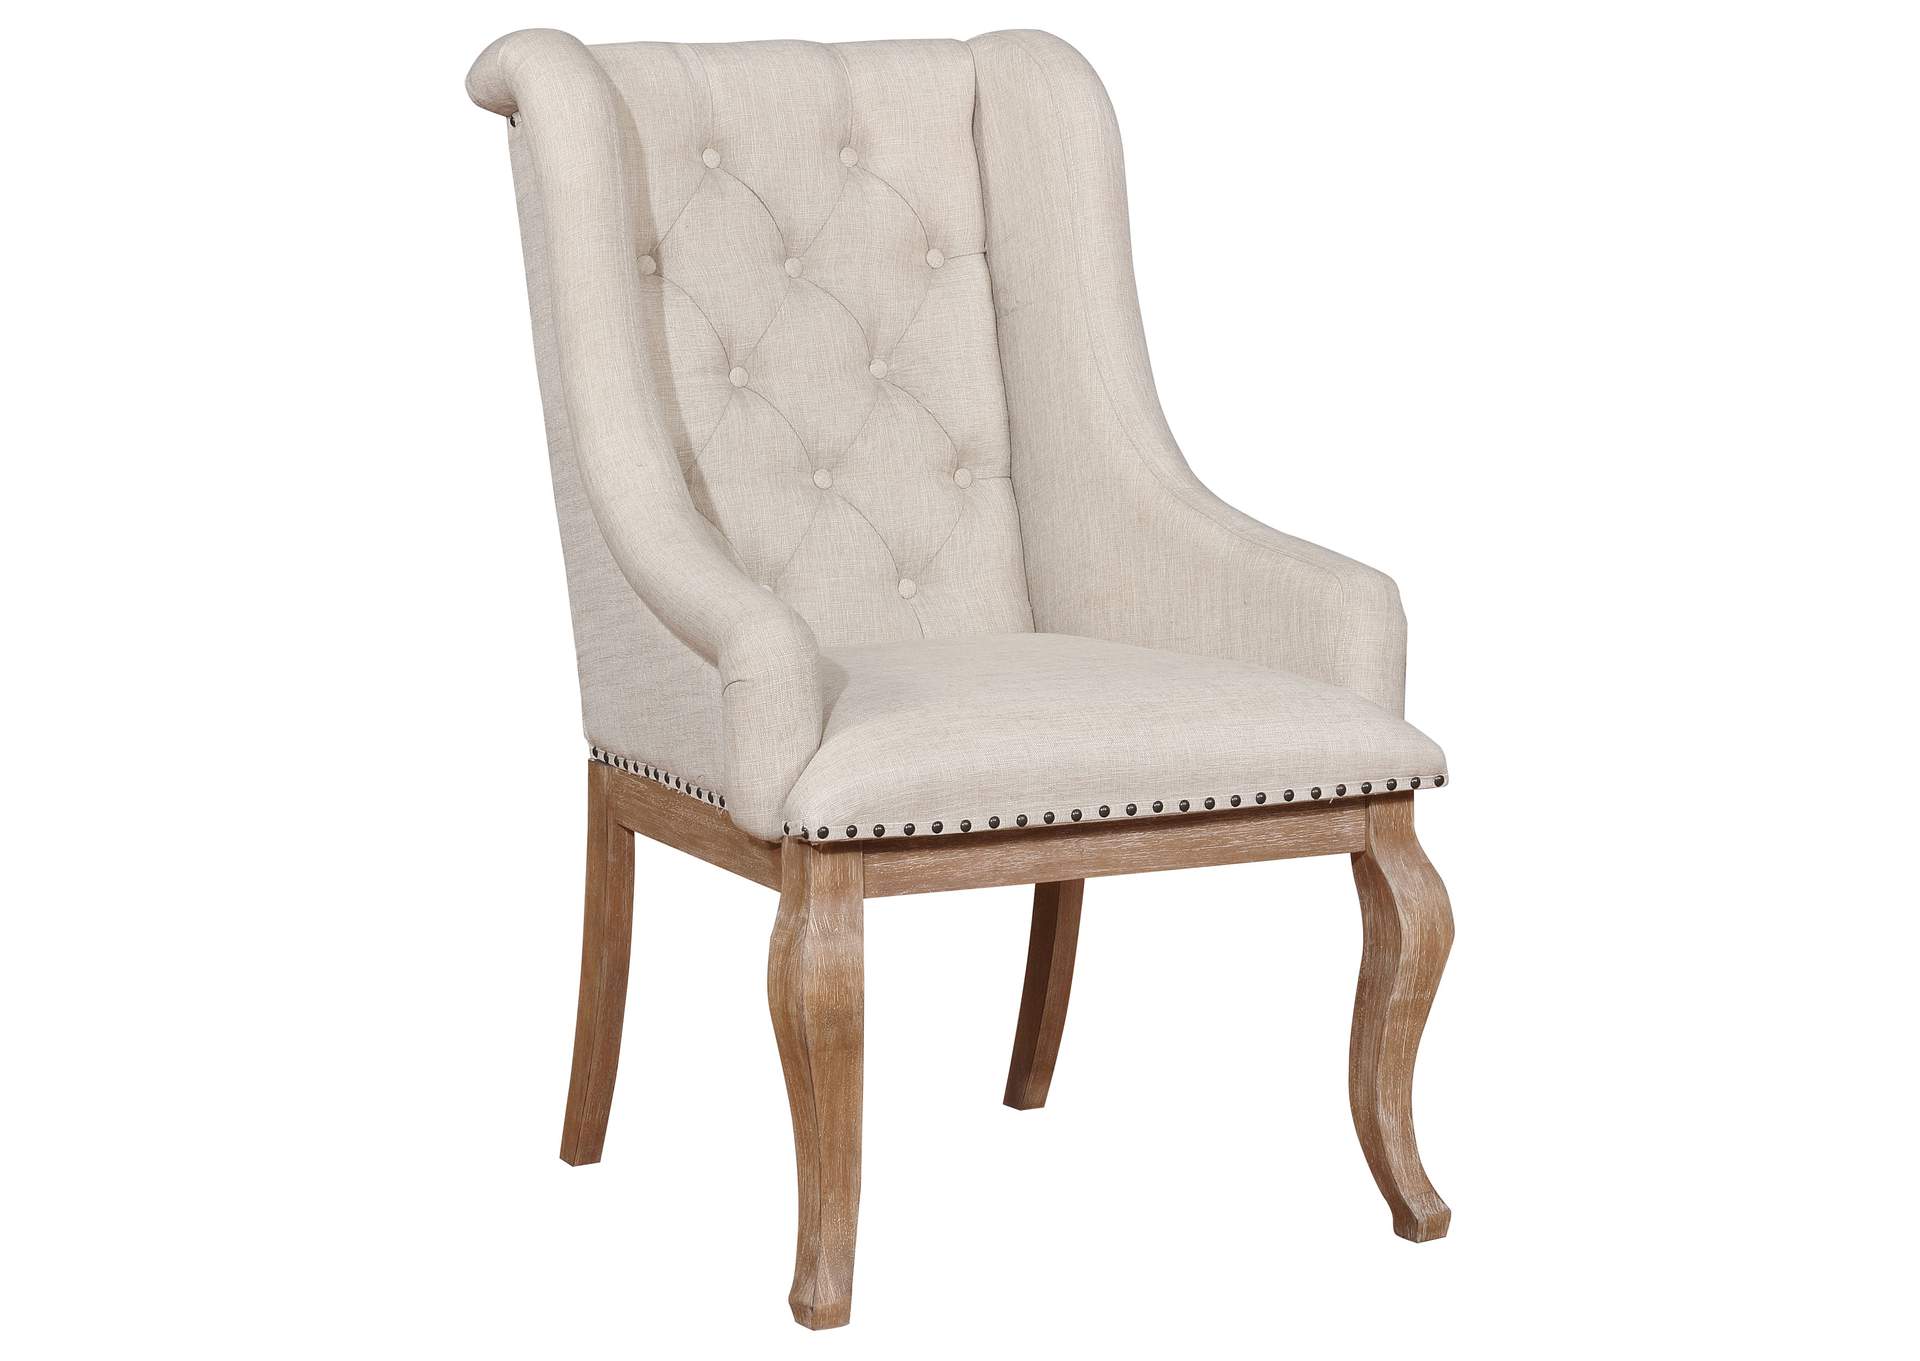 Brockway Cove Tufted Arm Chairs Cream and Barley Brown (Set of 2),Coaster Furniture